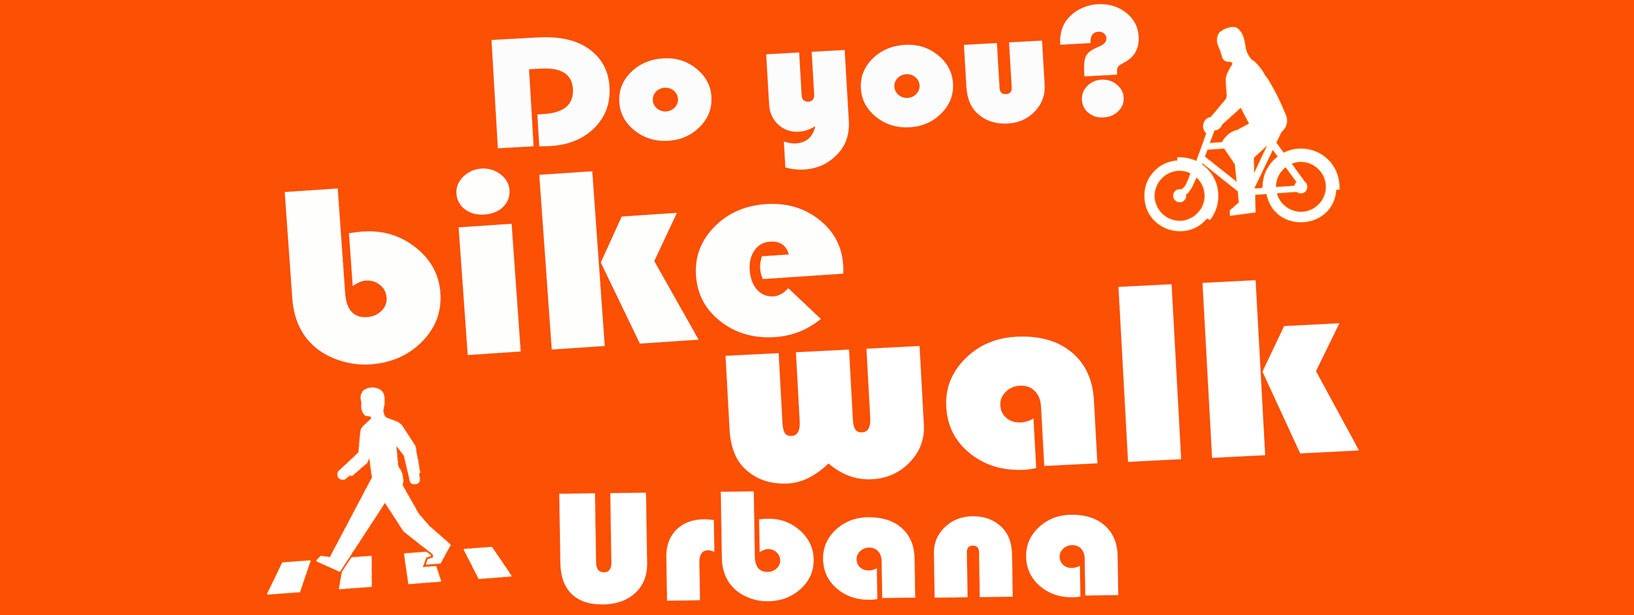 The City of Urbana is conducting a survey of residents’ cycling and walking habits